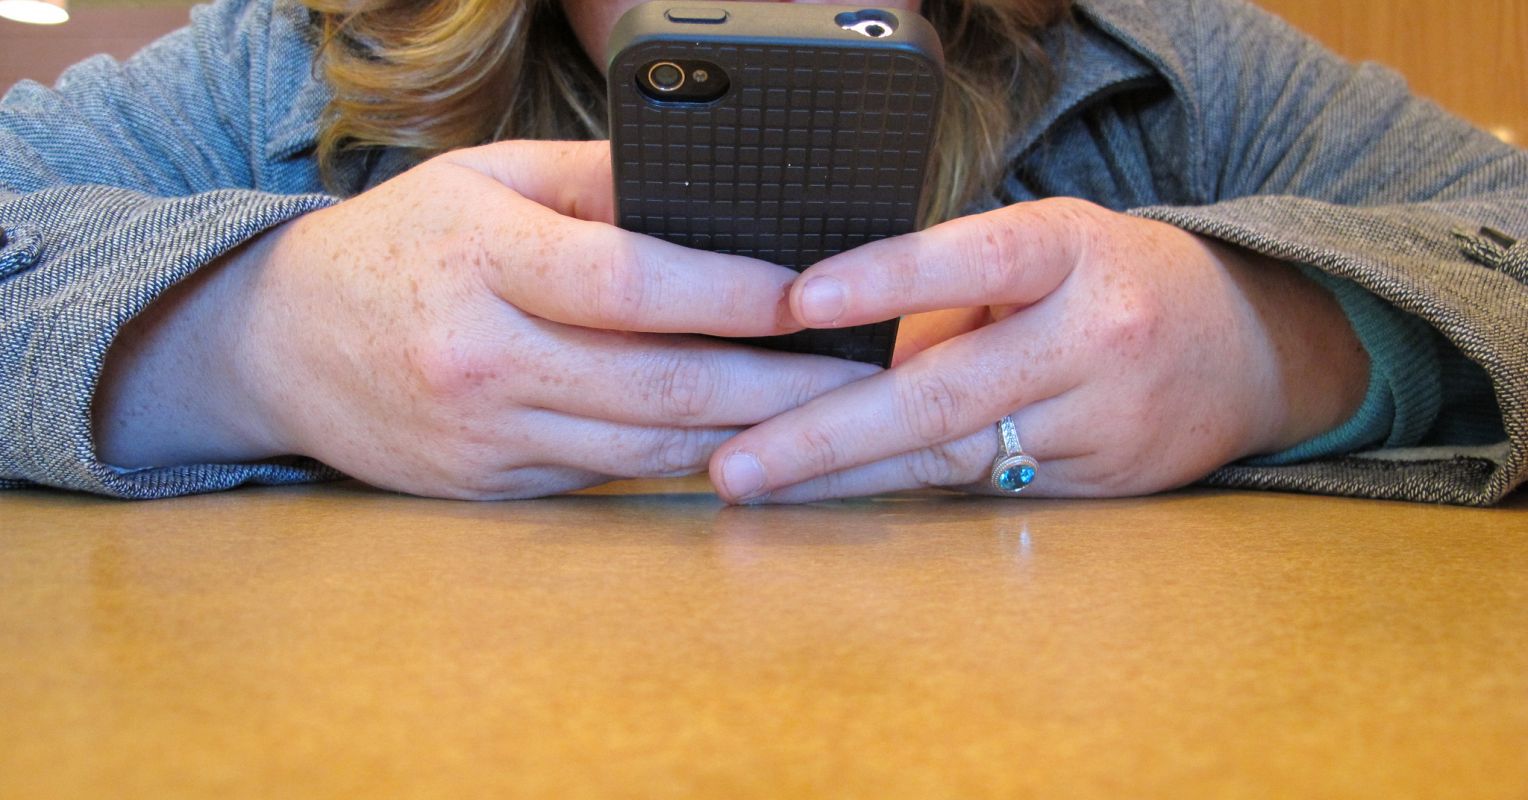 Is Your Cell Phone Your Best Friend? Psychology Today